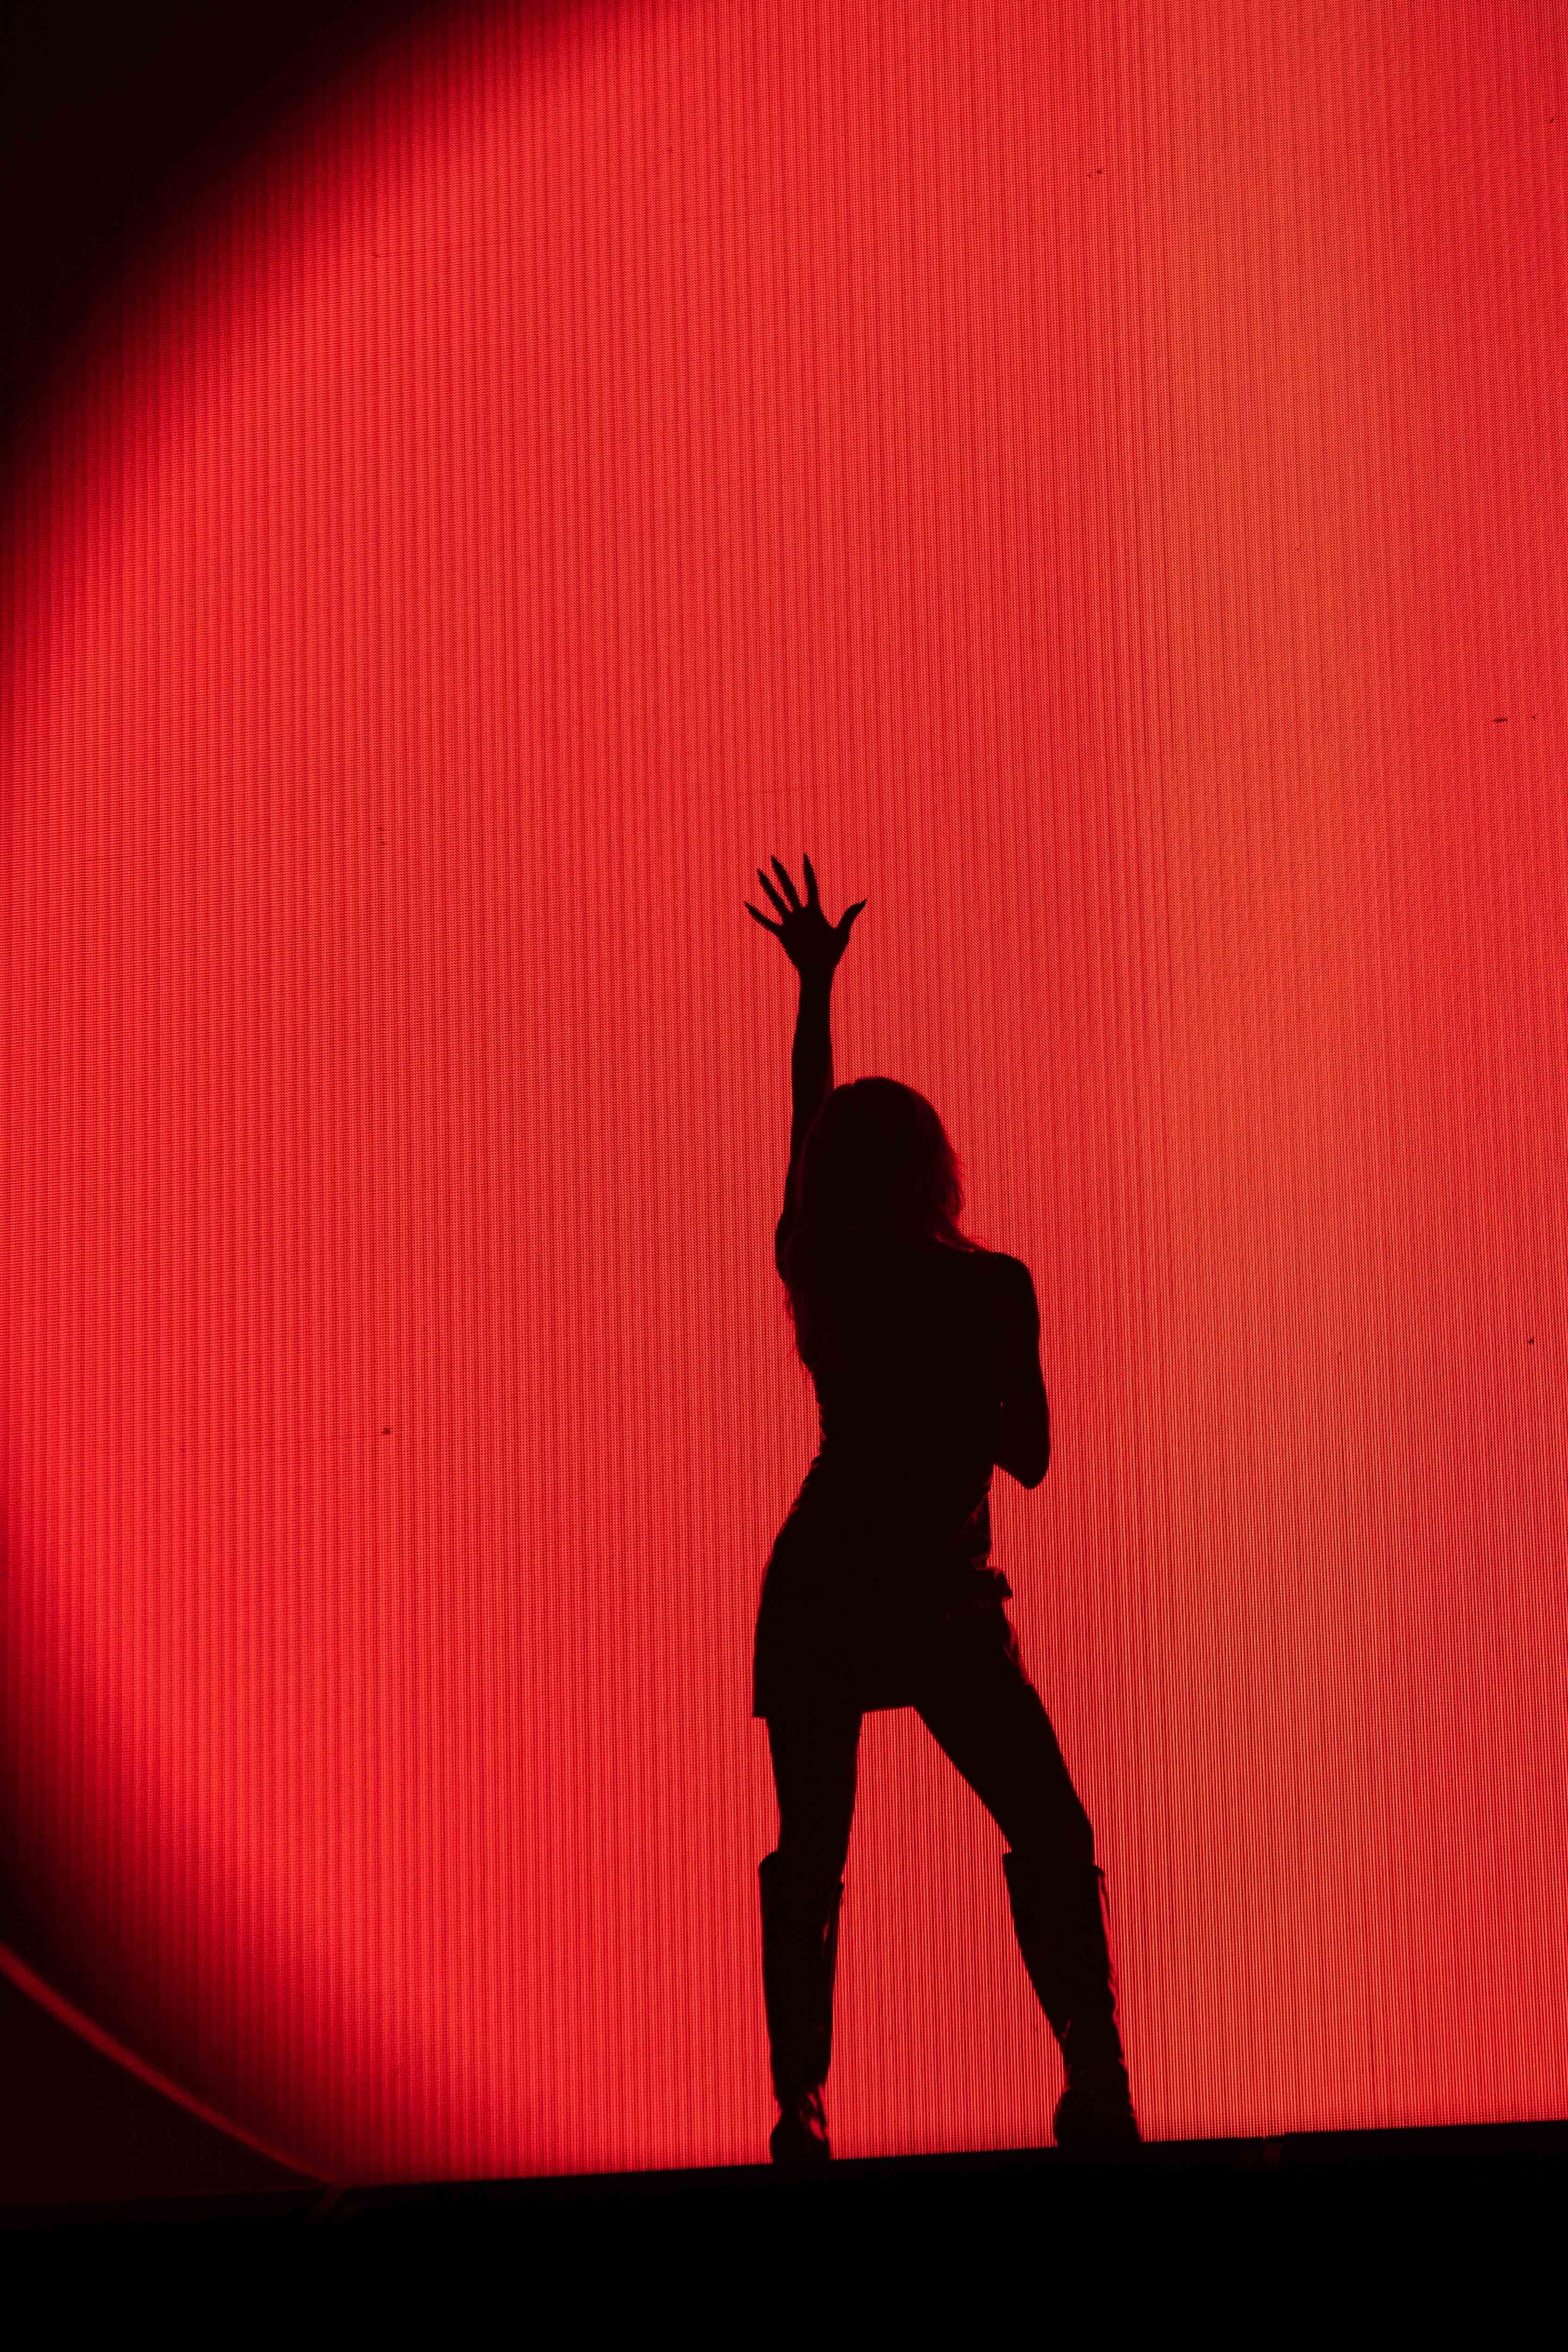 Jepsen's silhouette was met with excited screams from the crowd as she entered the stage.